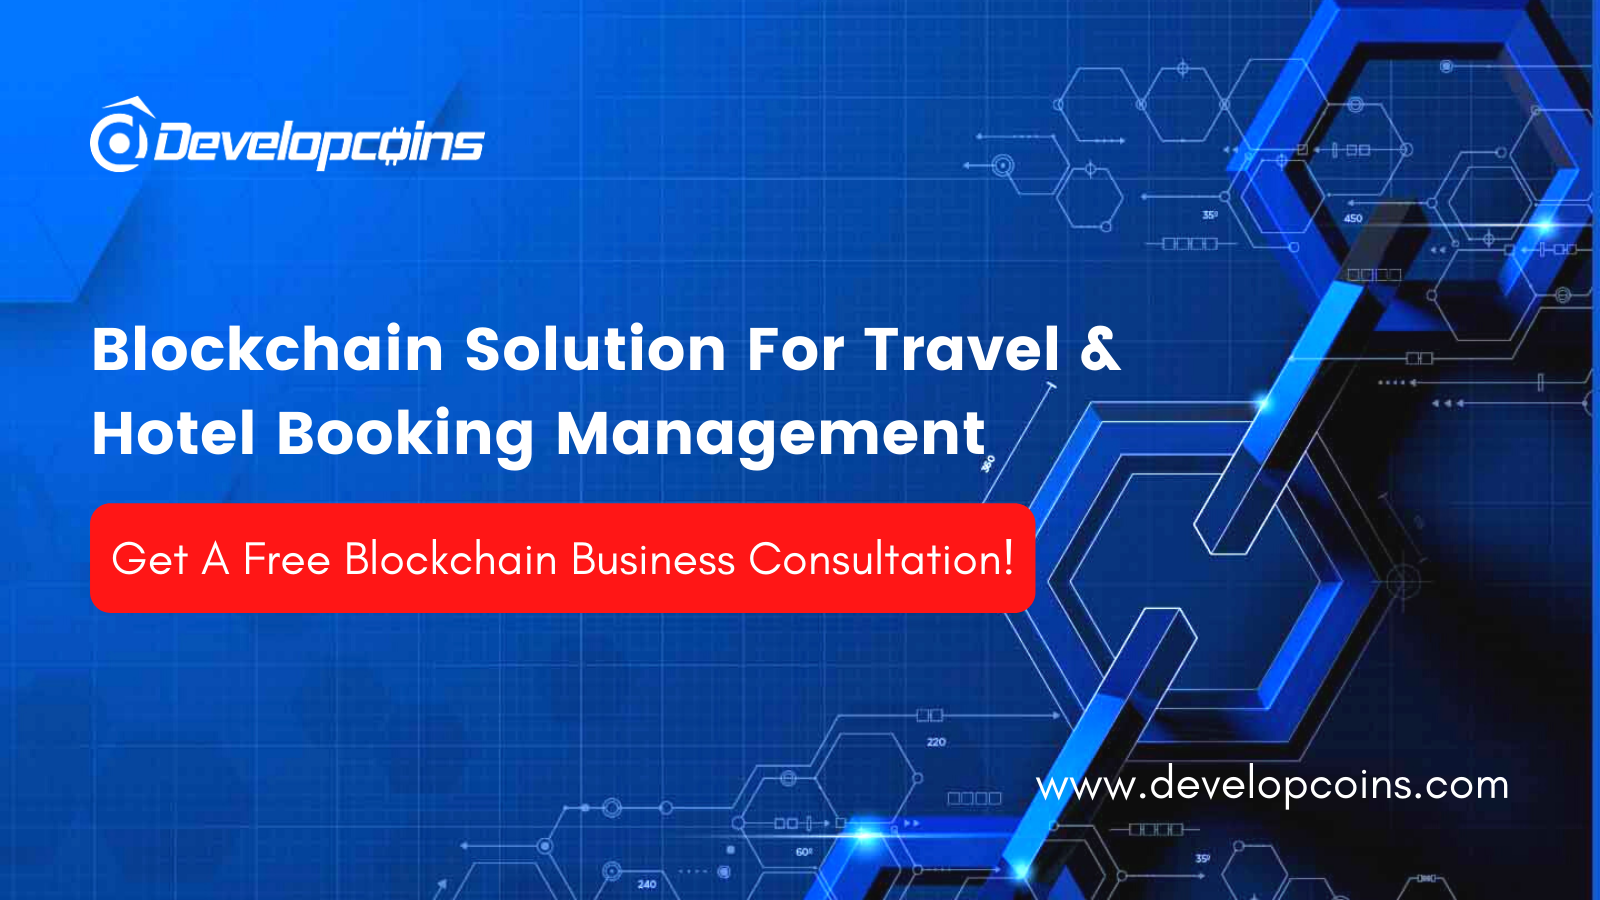 Blockchain Solution For Travel & Hotel Booking Management